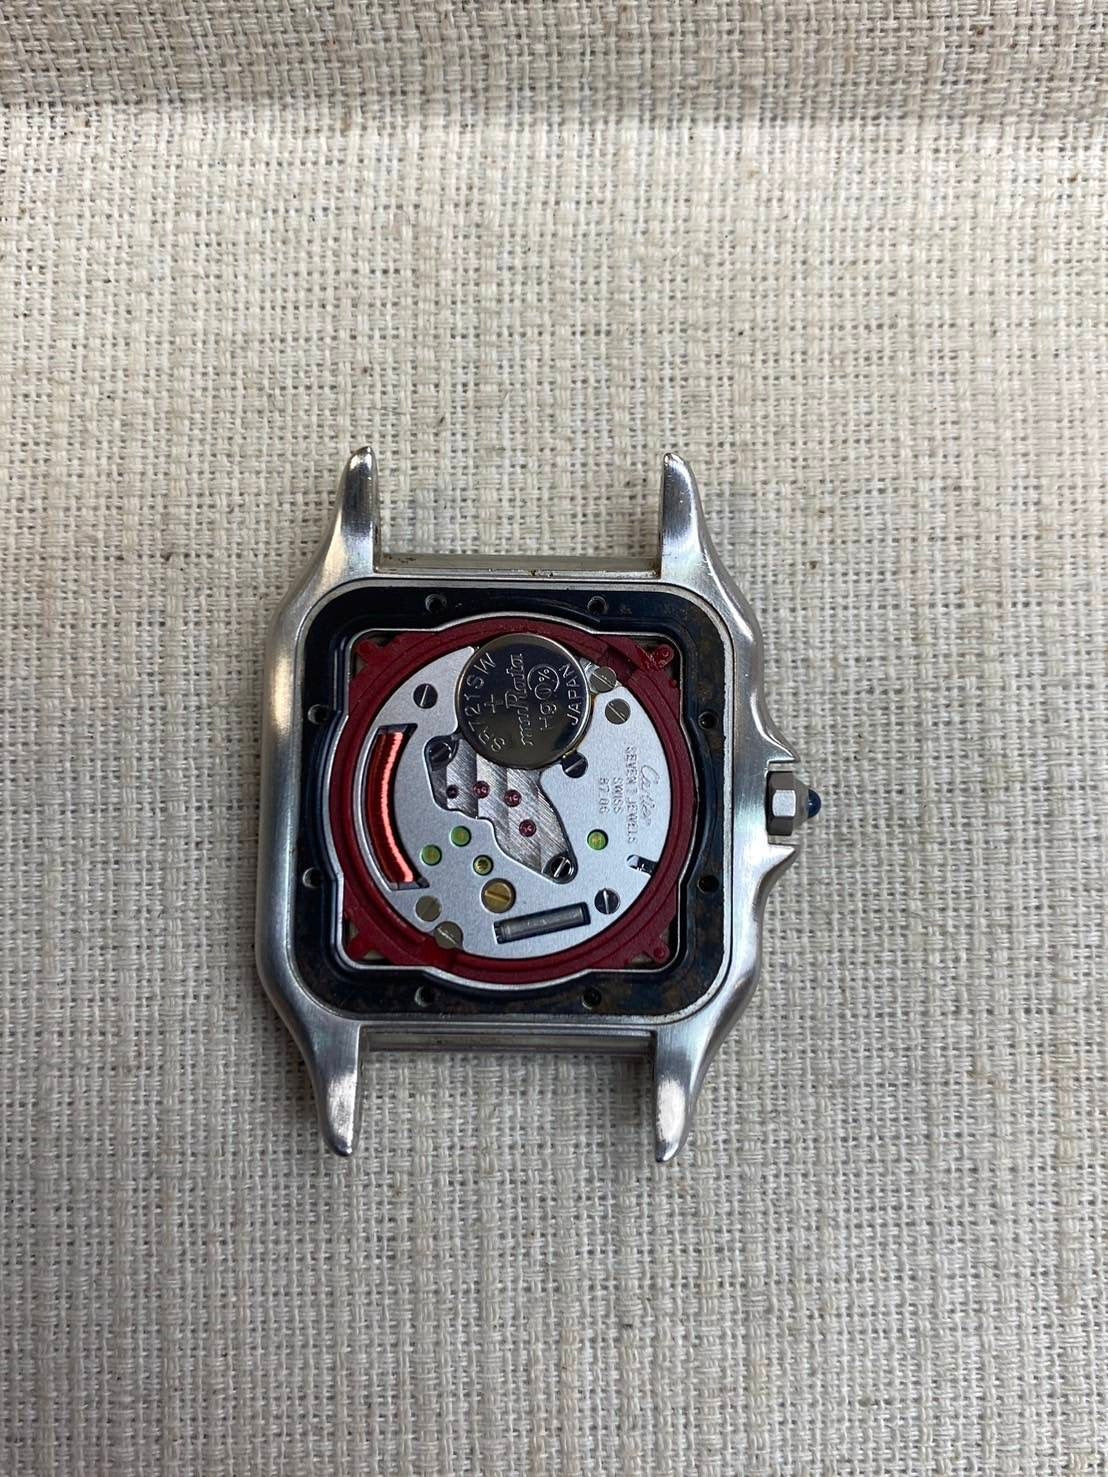 CARTIER カルティエ PANTHERE LM パンテール LM W25027B6 / 187957 クォーツ SS/YG SS/YG アイボリー文字盤 保証書（1995年）